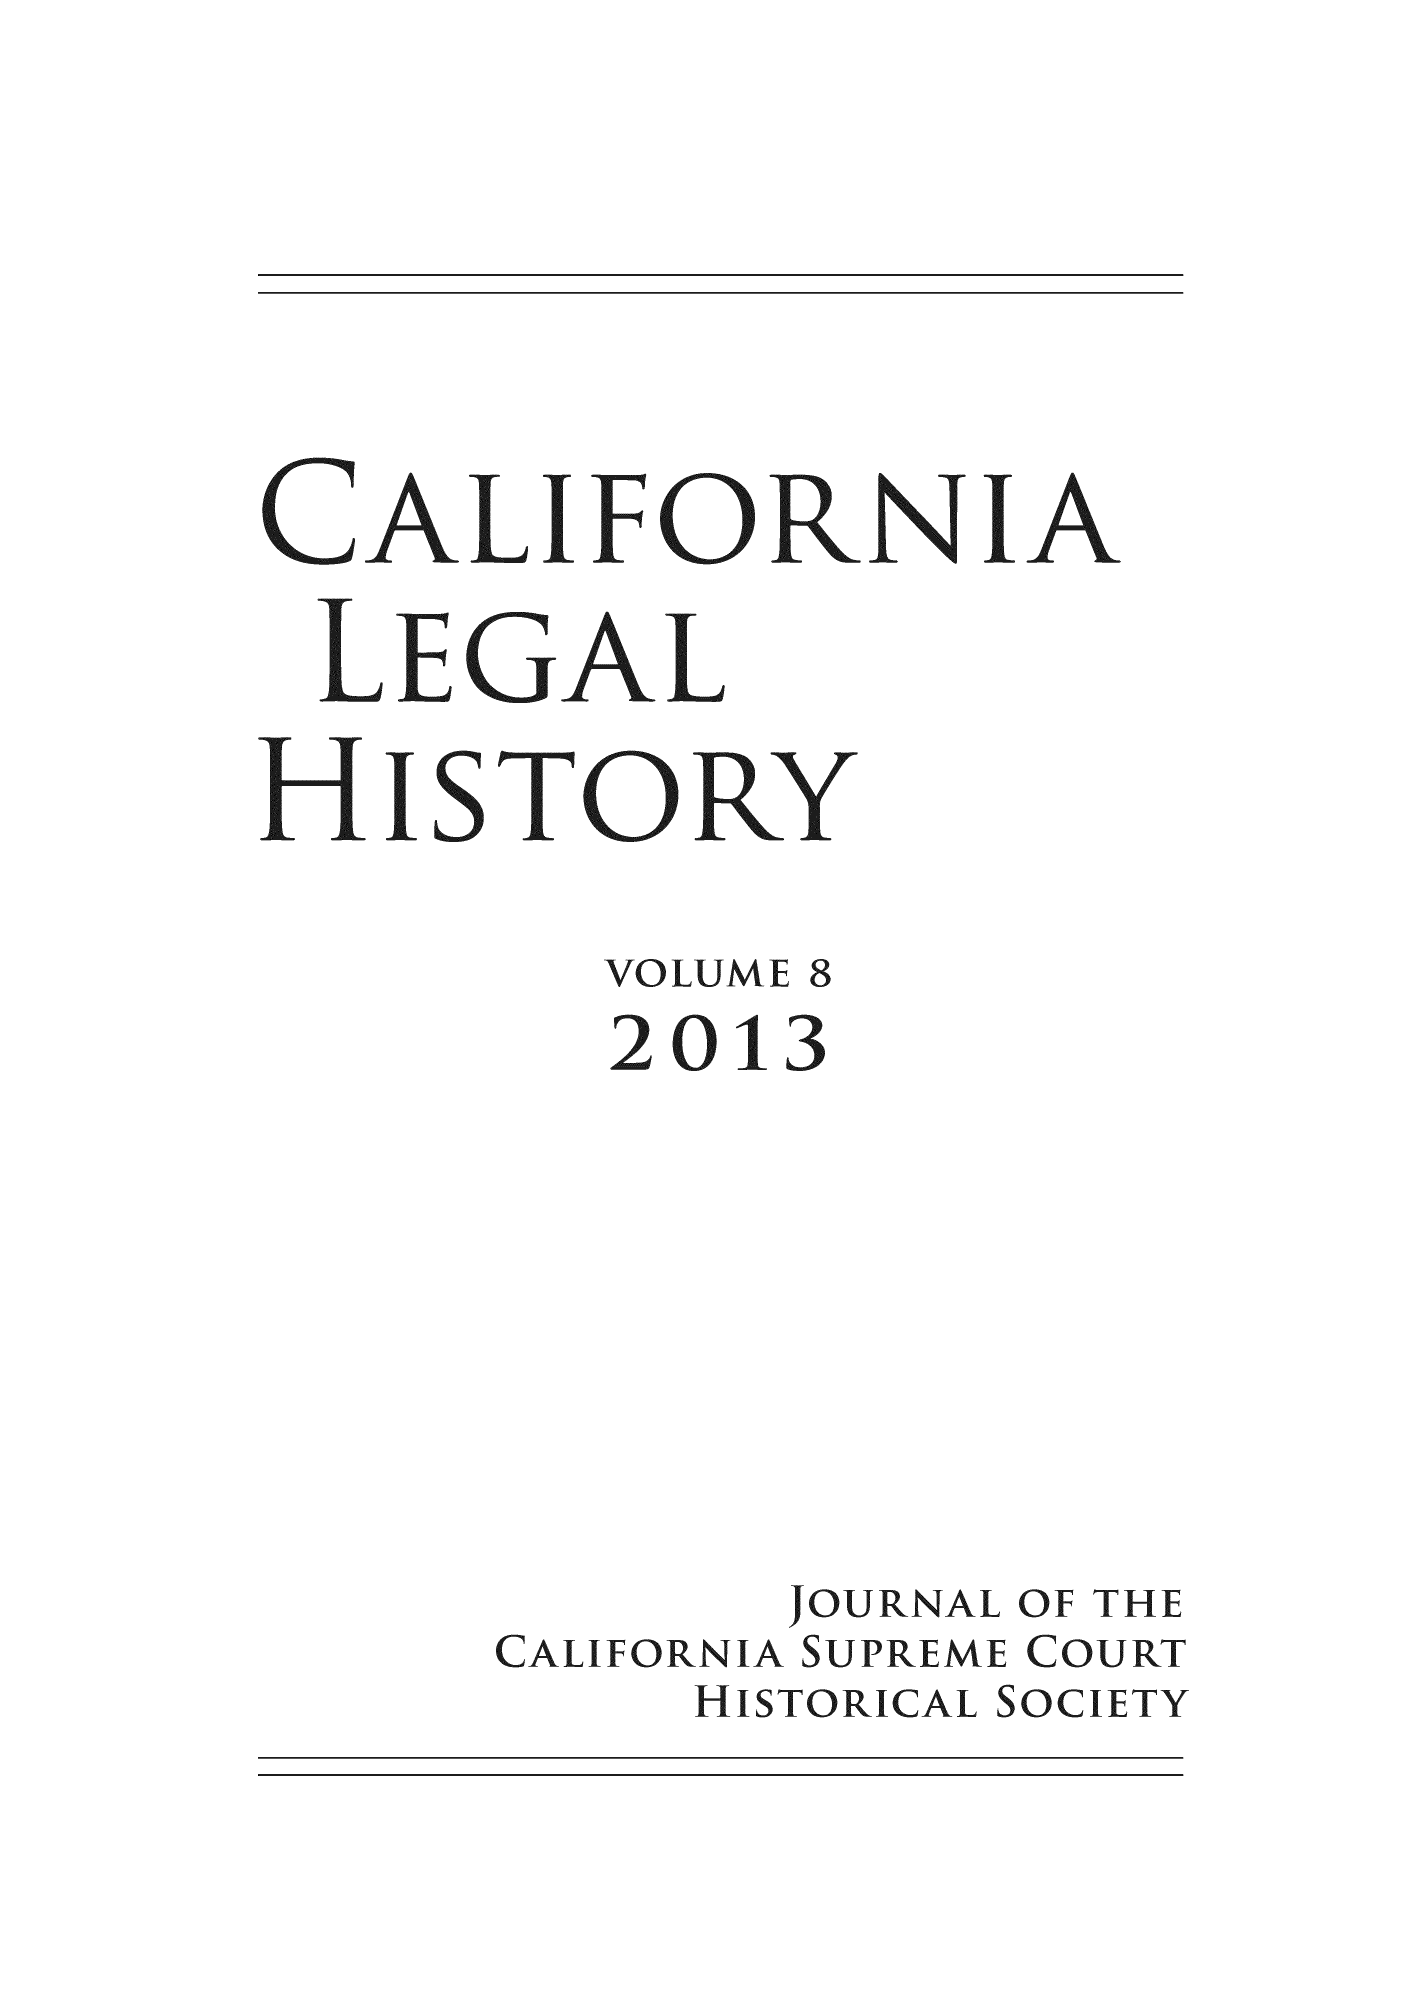 handle is hein.journals/calegh8 and id is 1 raw text is: CALIFORNIALEGALHISTORYOuLUVVE8zul3JOURNAL OF THECALIF ORNIA SUPREVVE COURT